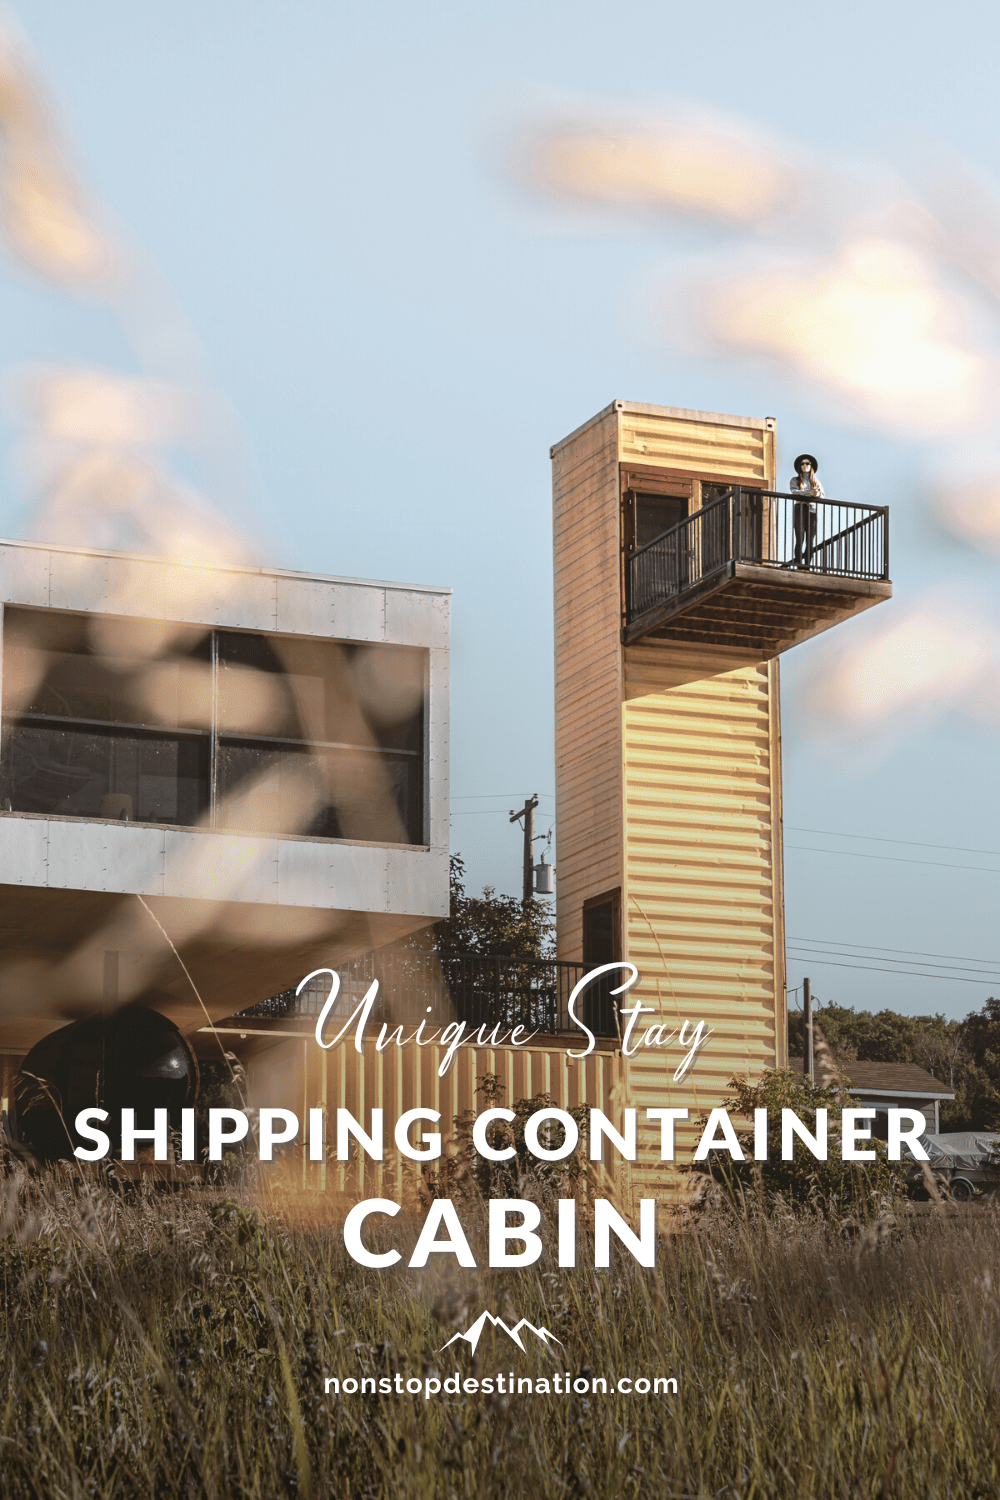 Container ship cabin pin 01